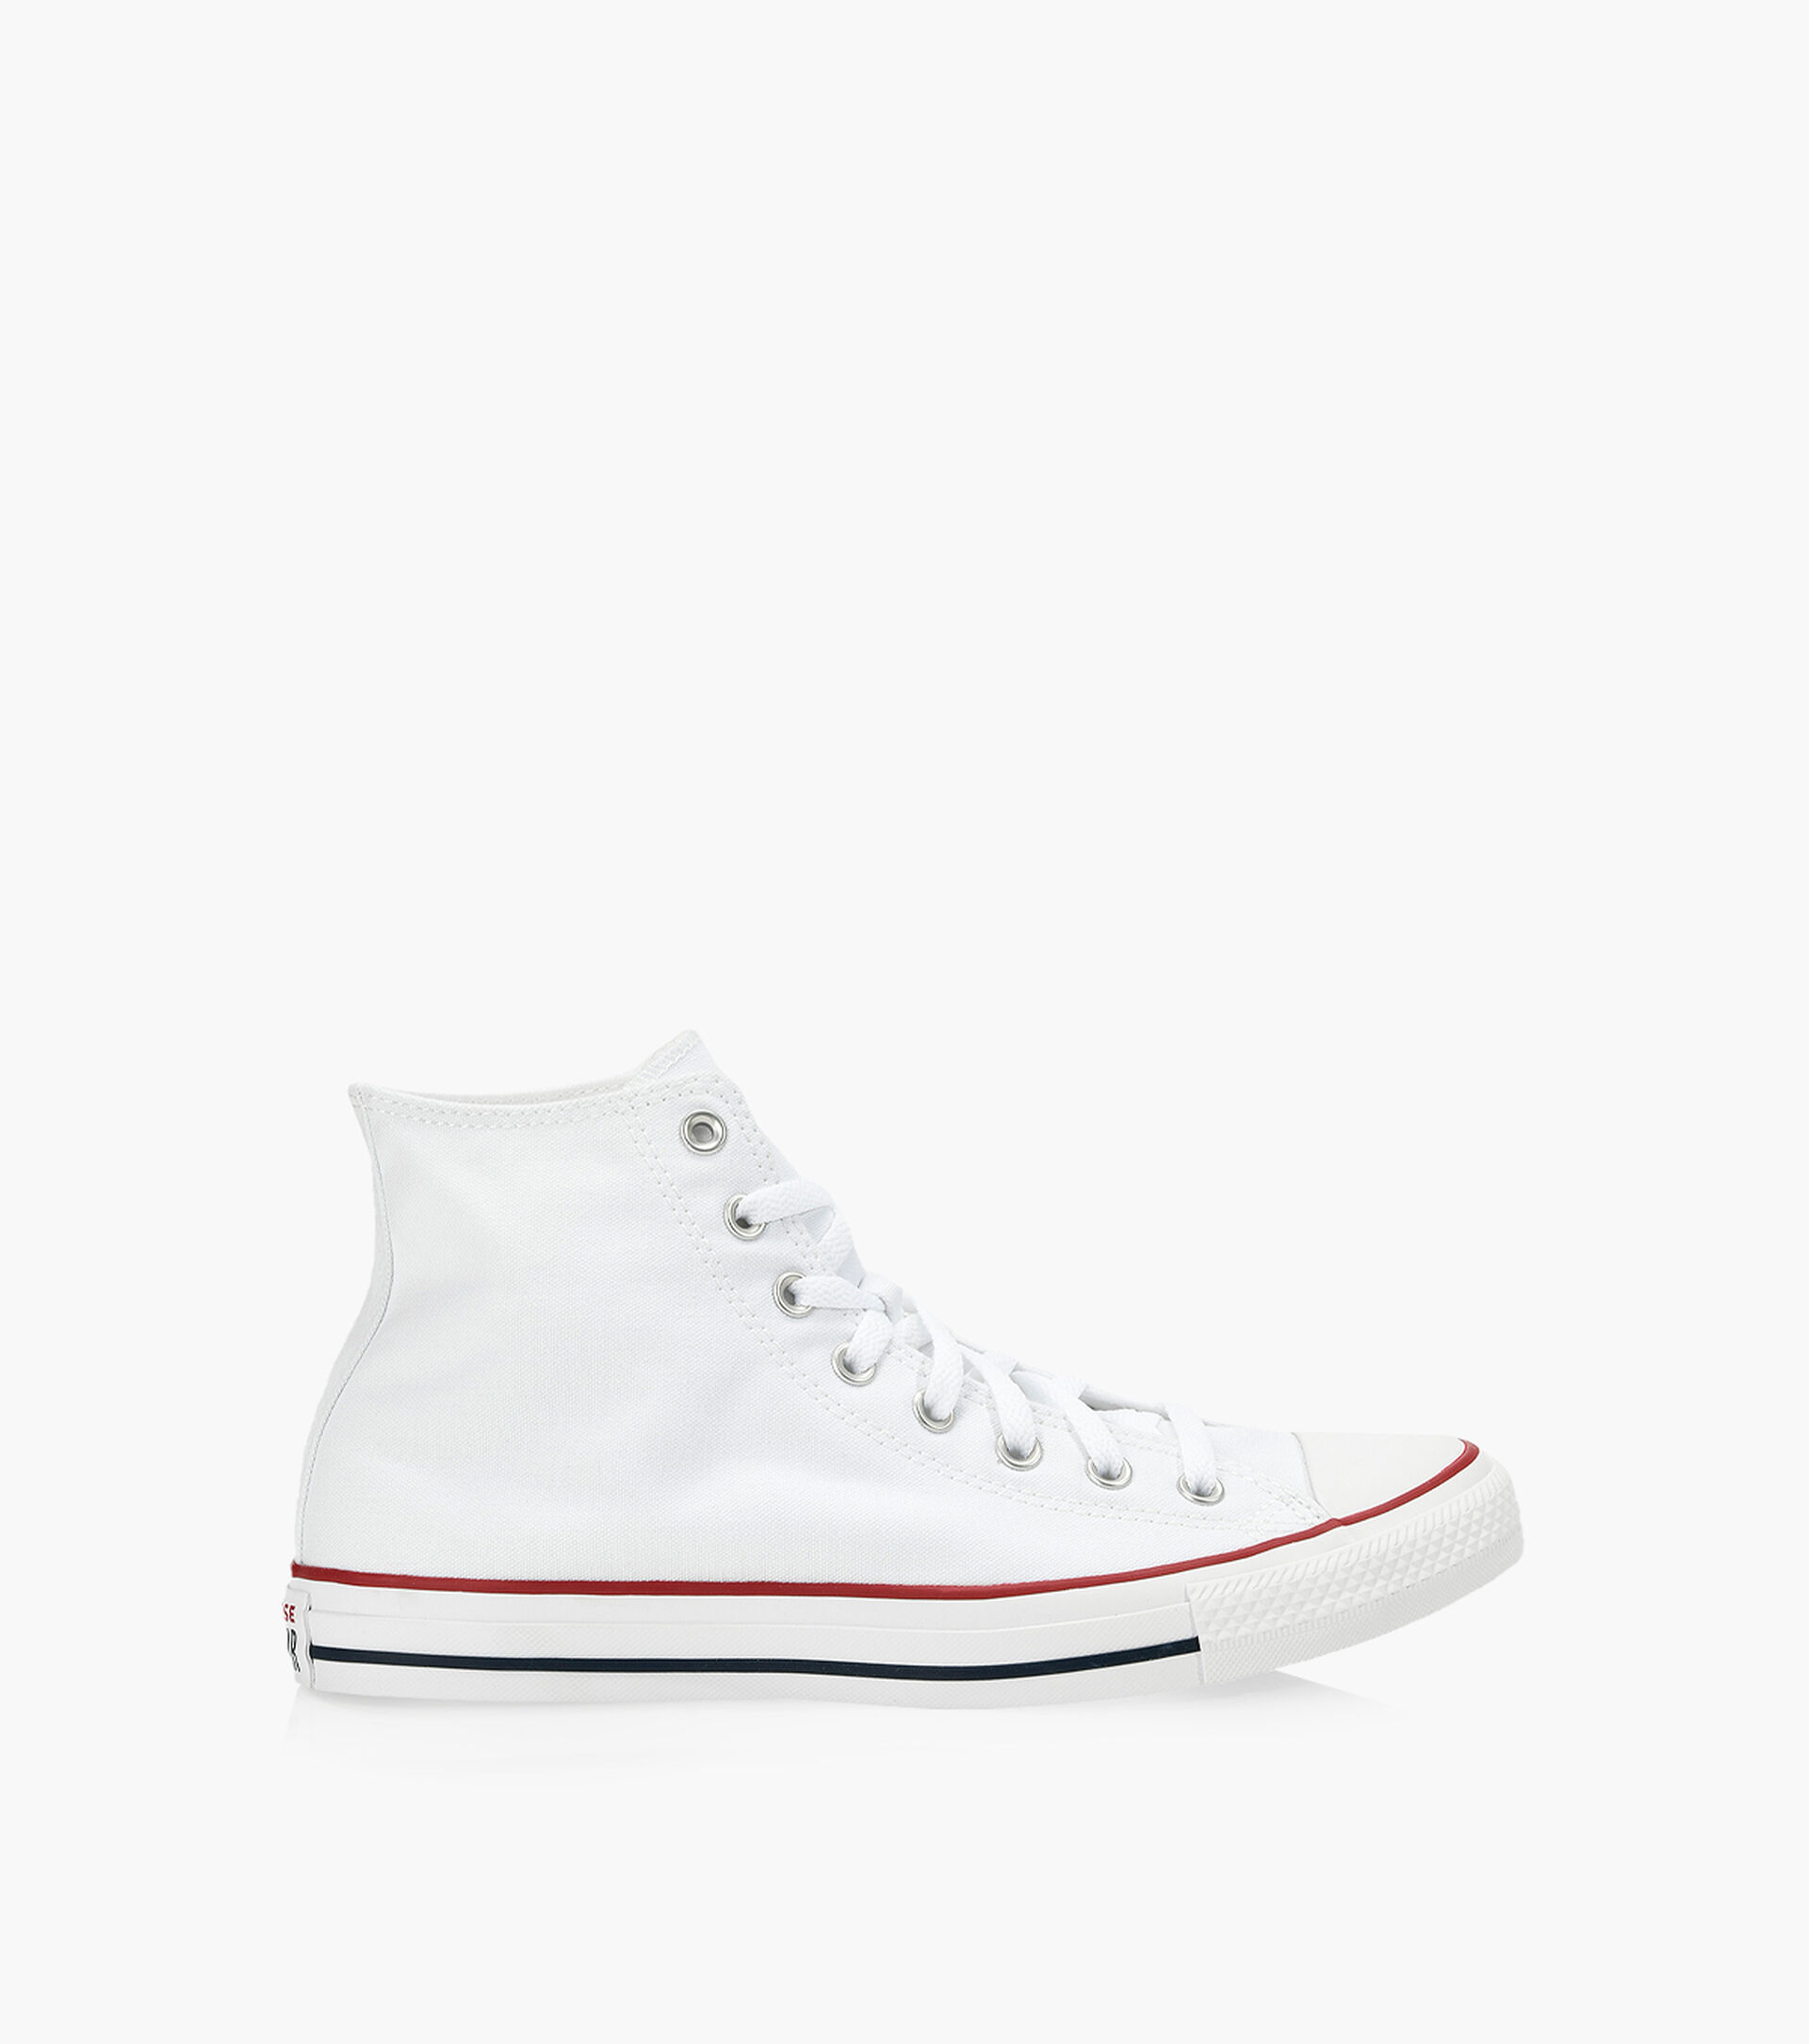 CONVERSE CHUCK TAYLOR ALL STAR HIGH TOP - Fabric | Browns Shoes